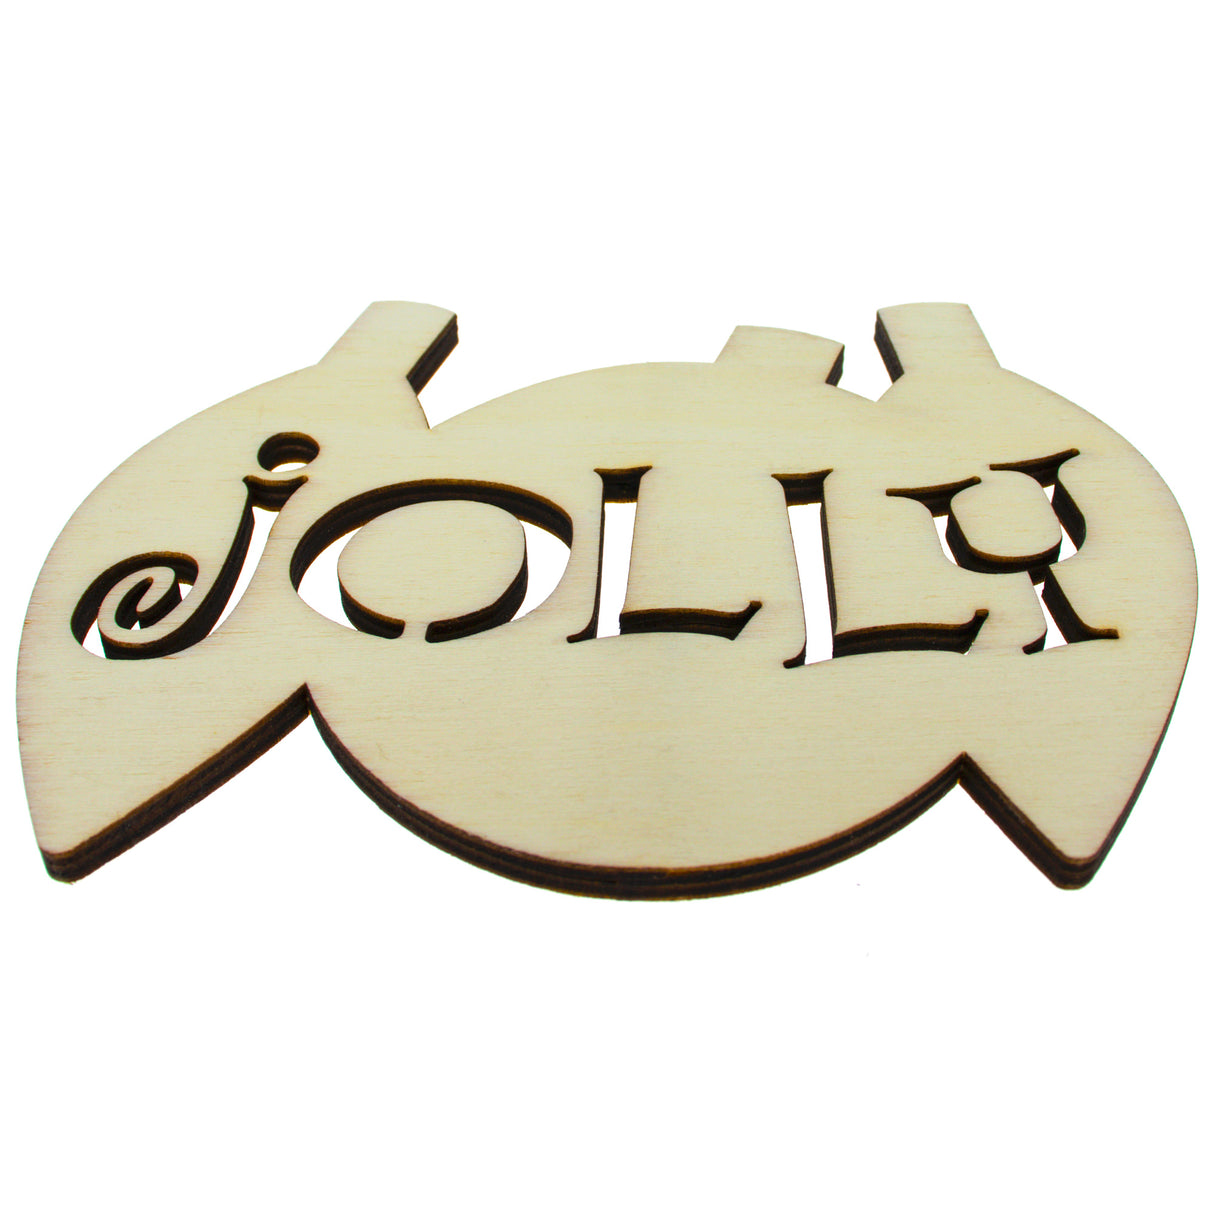 Unfinished Wooden Multiple Ornament Shape with Text "Jolly" text Cutout DIY Craft 5 Inches in Beige color,  shape